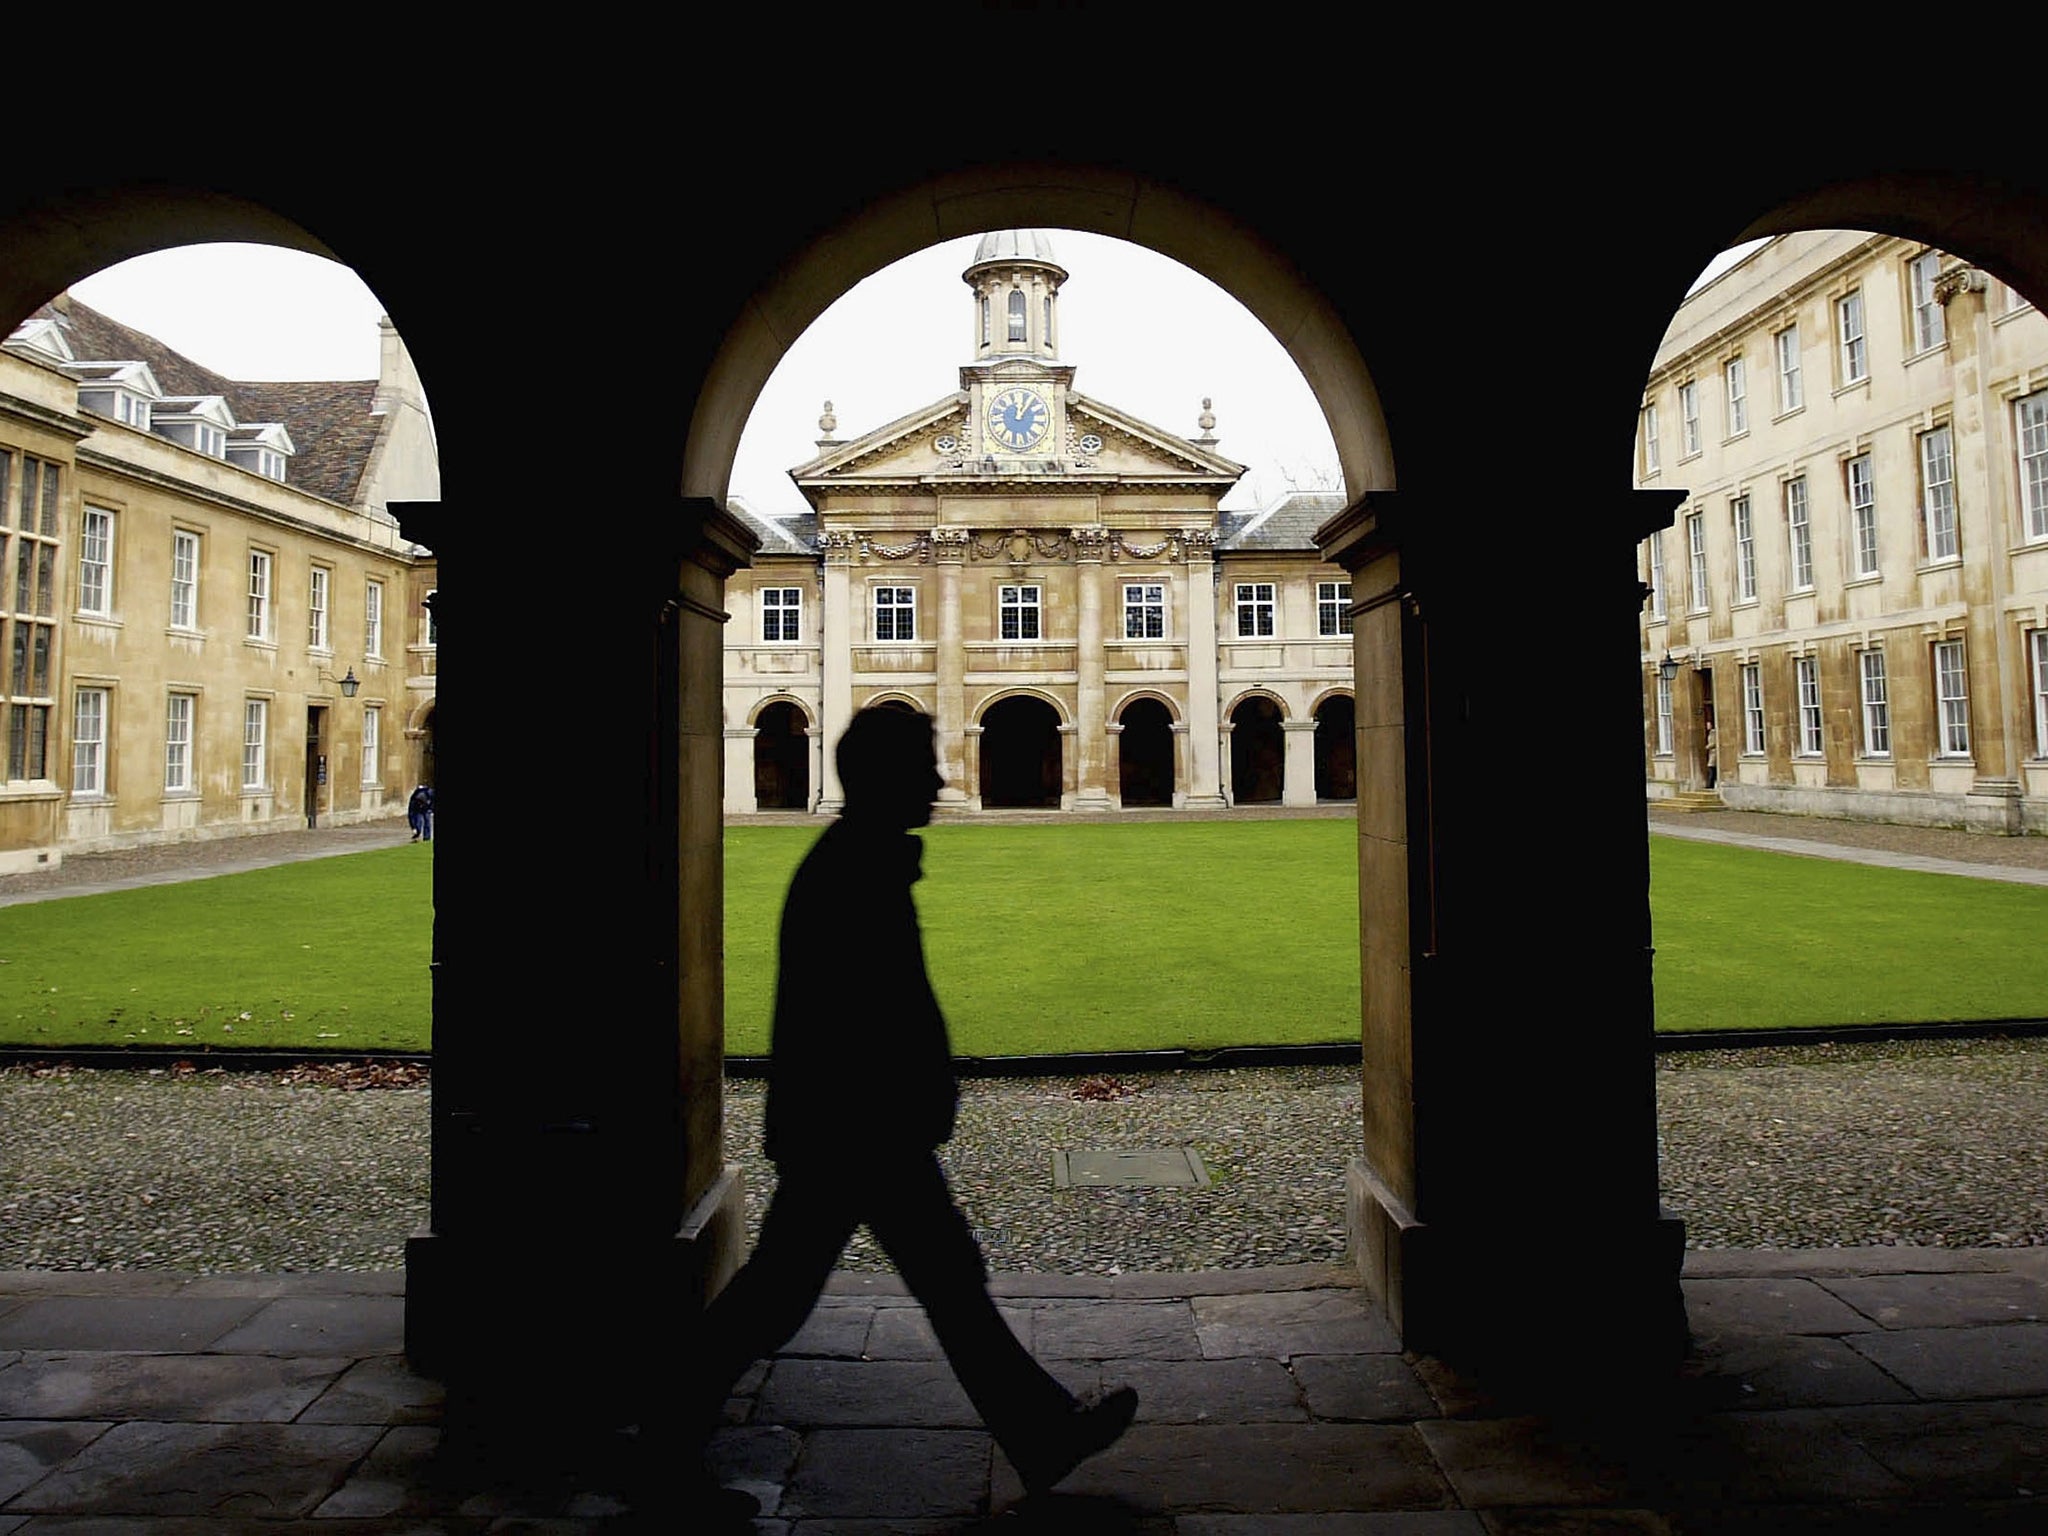 Institutions like Cambridge, pictured, have 'a particular challenge' ahead of them, says the Minister for Universities